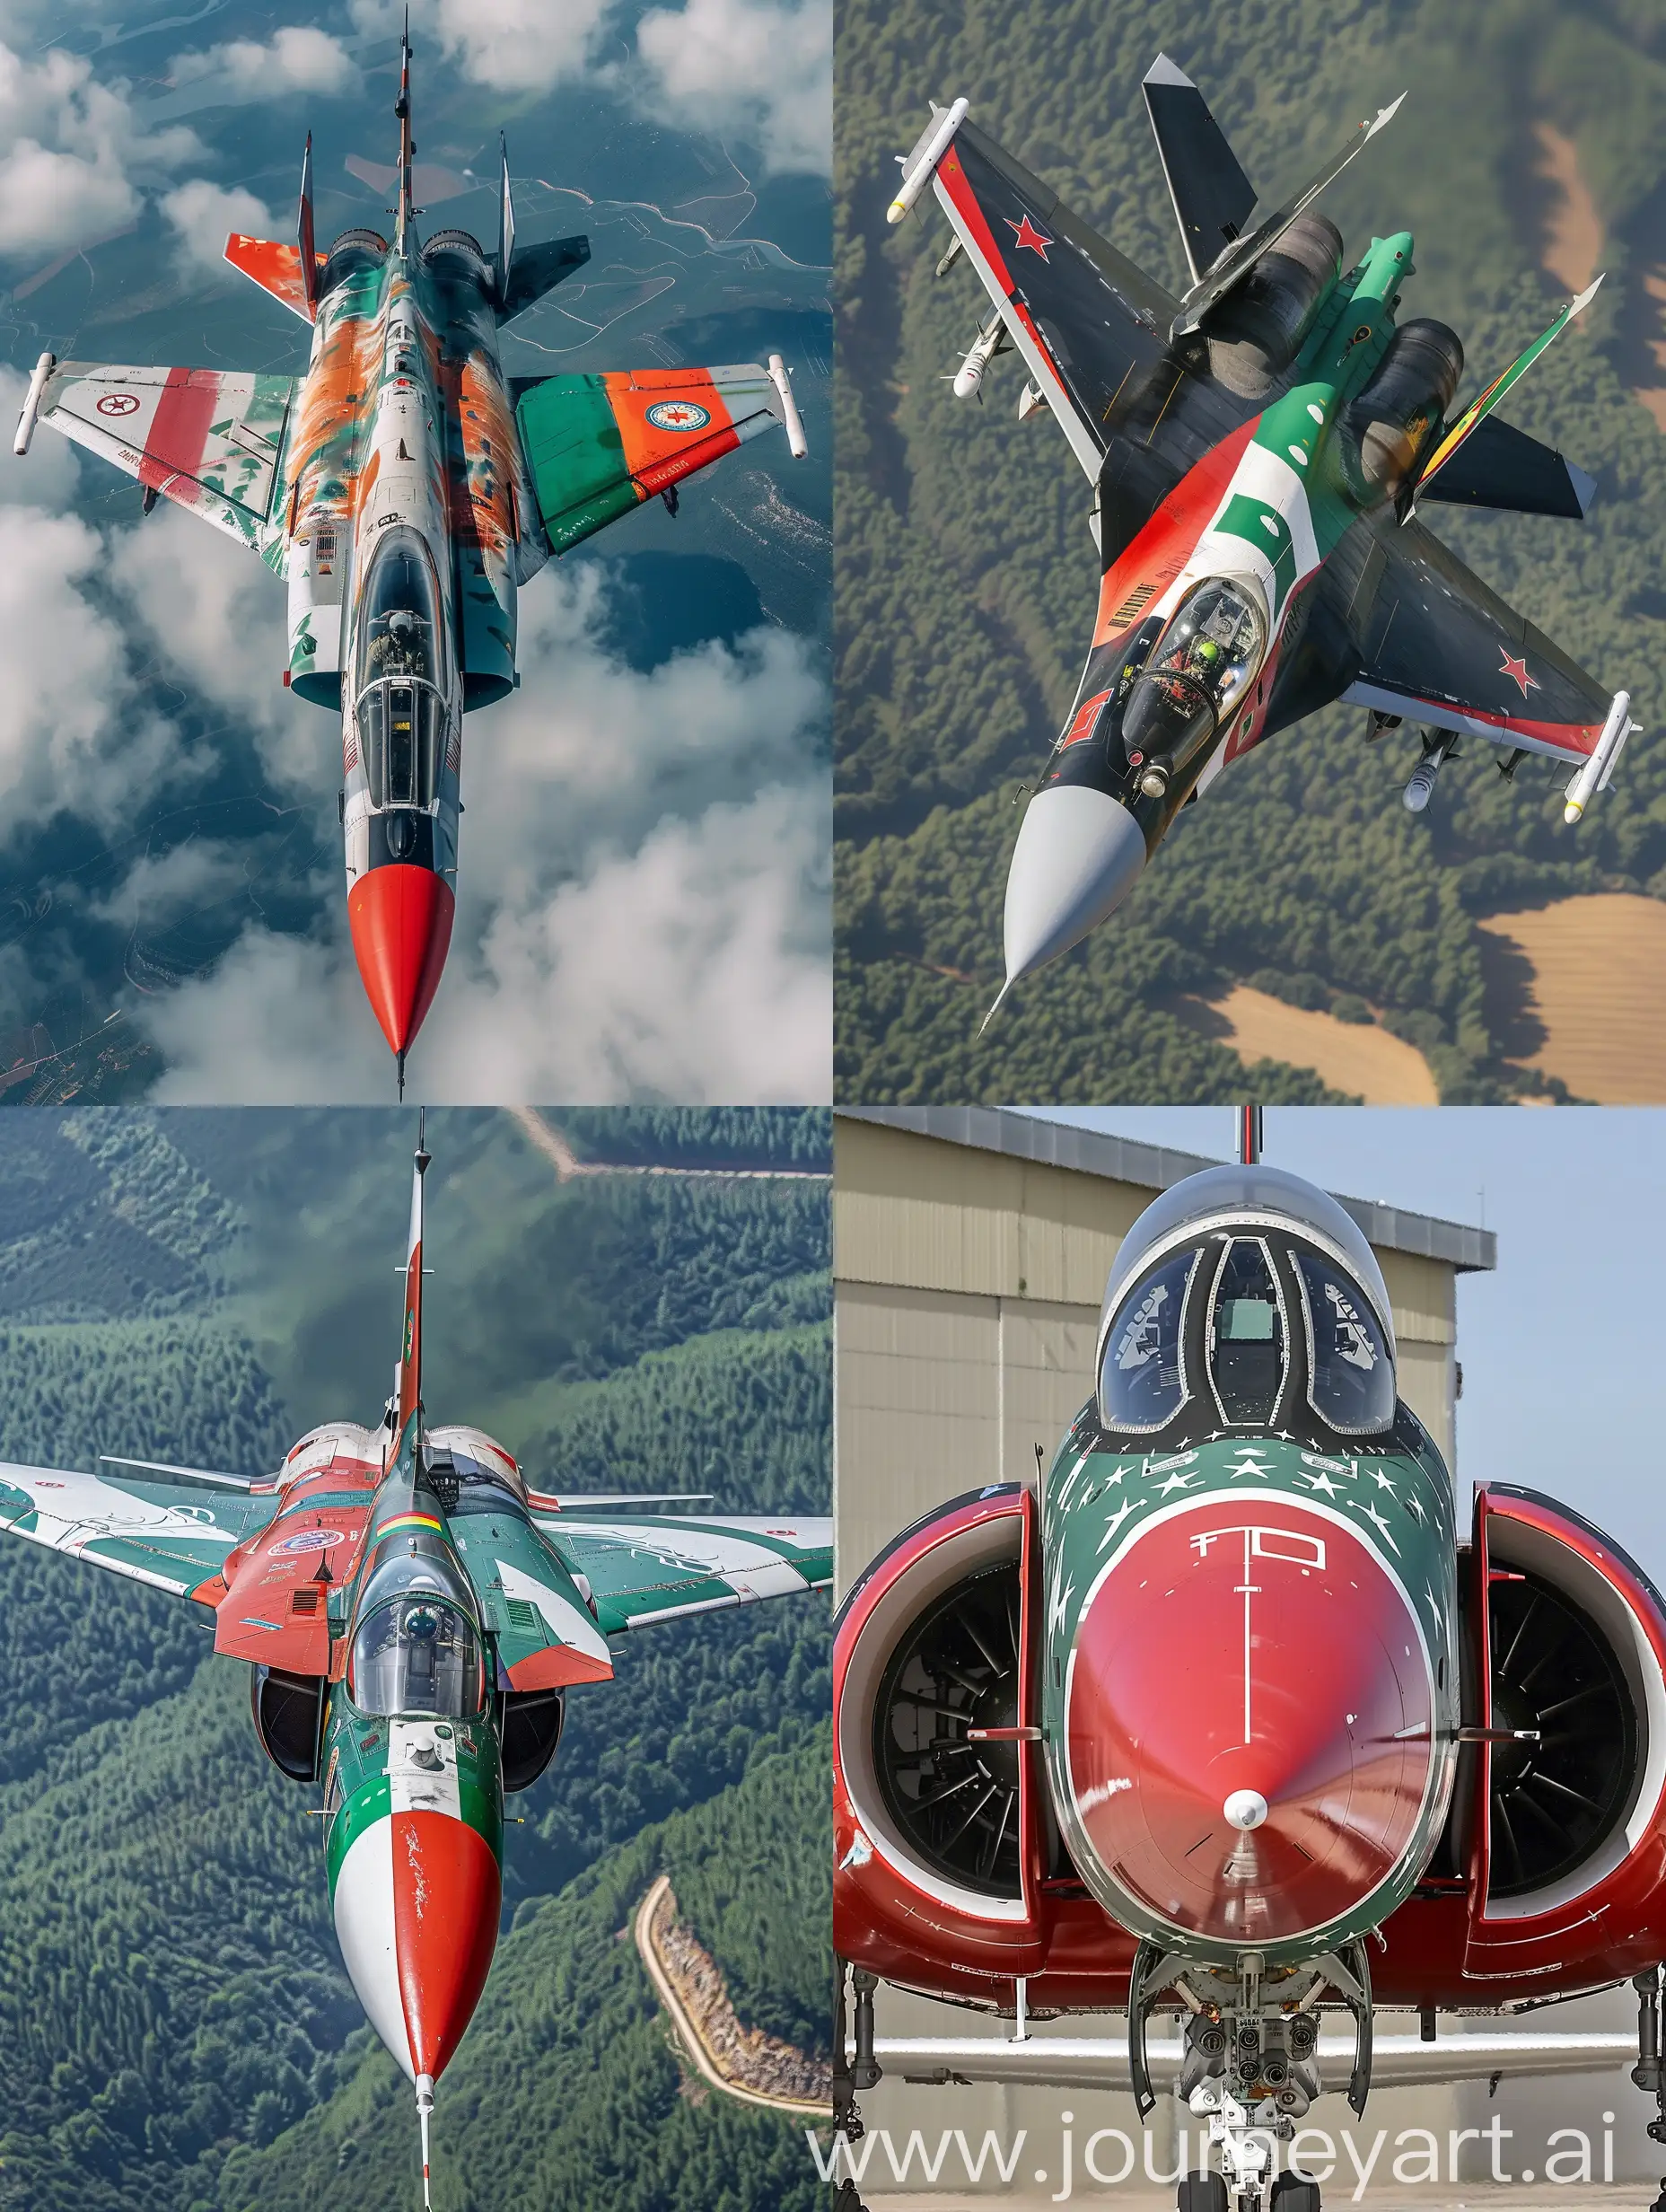 Algerian-Flag-Painted-SU30-Jet-Flying-in-the-Sky